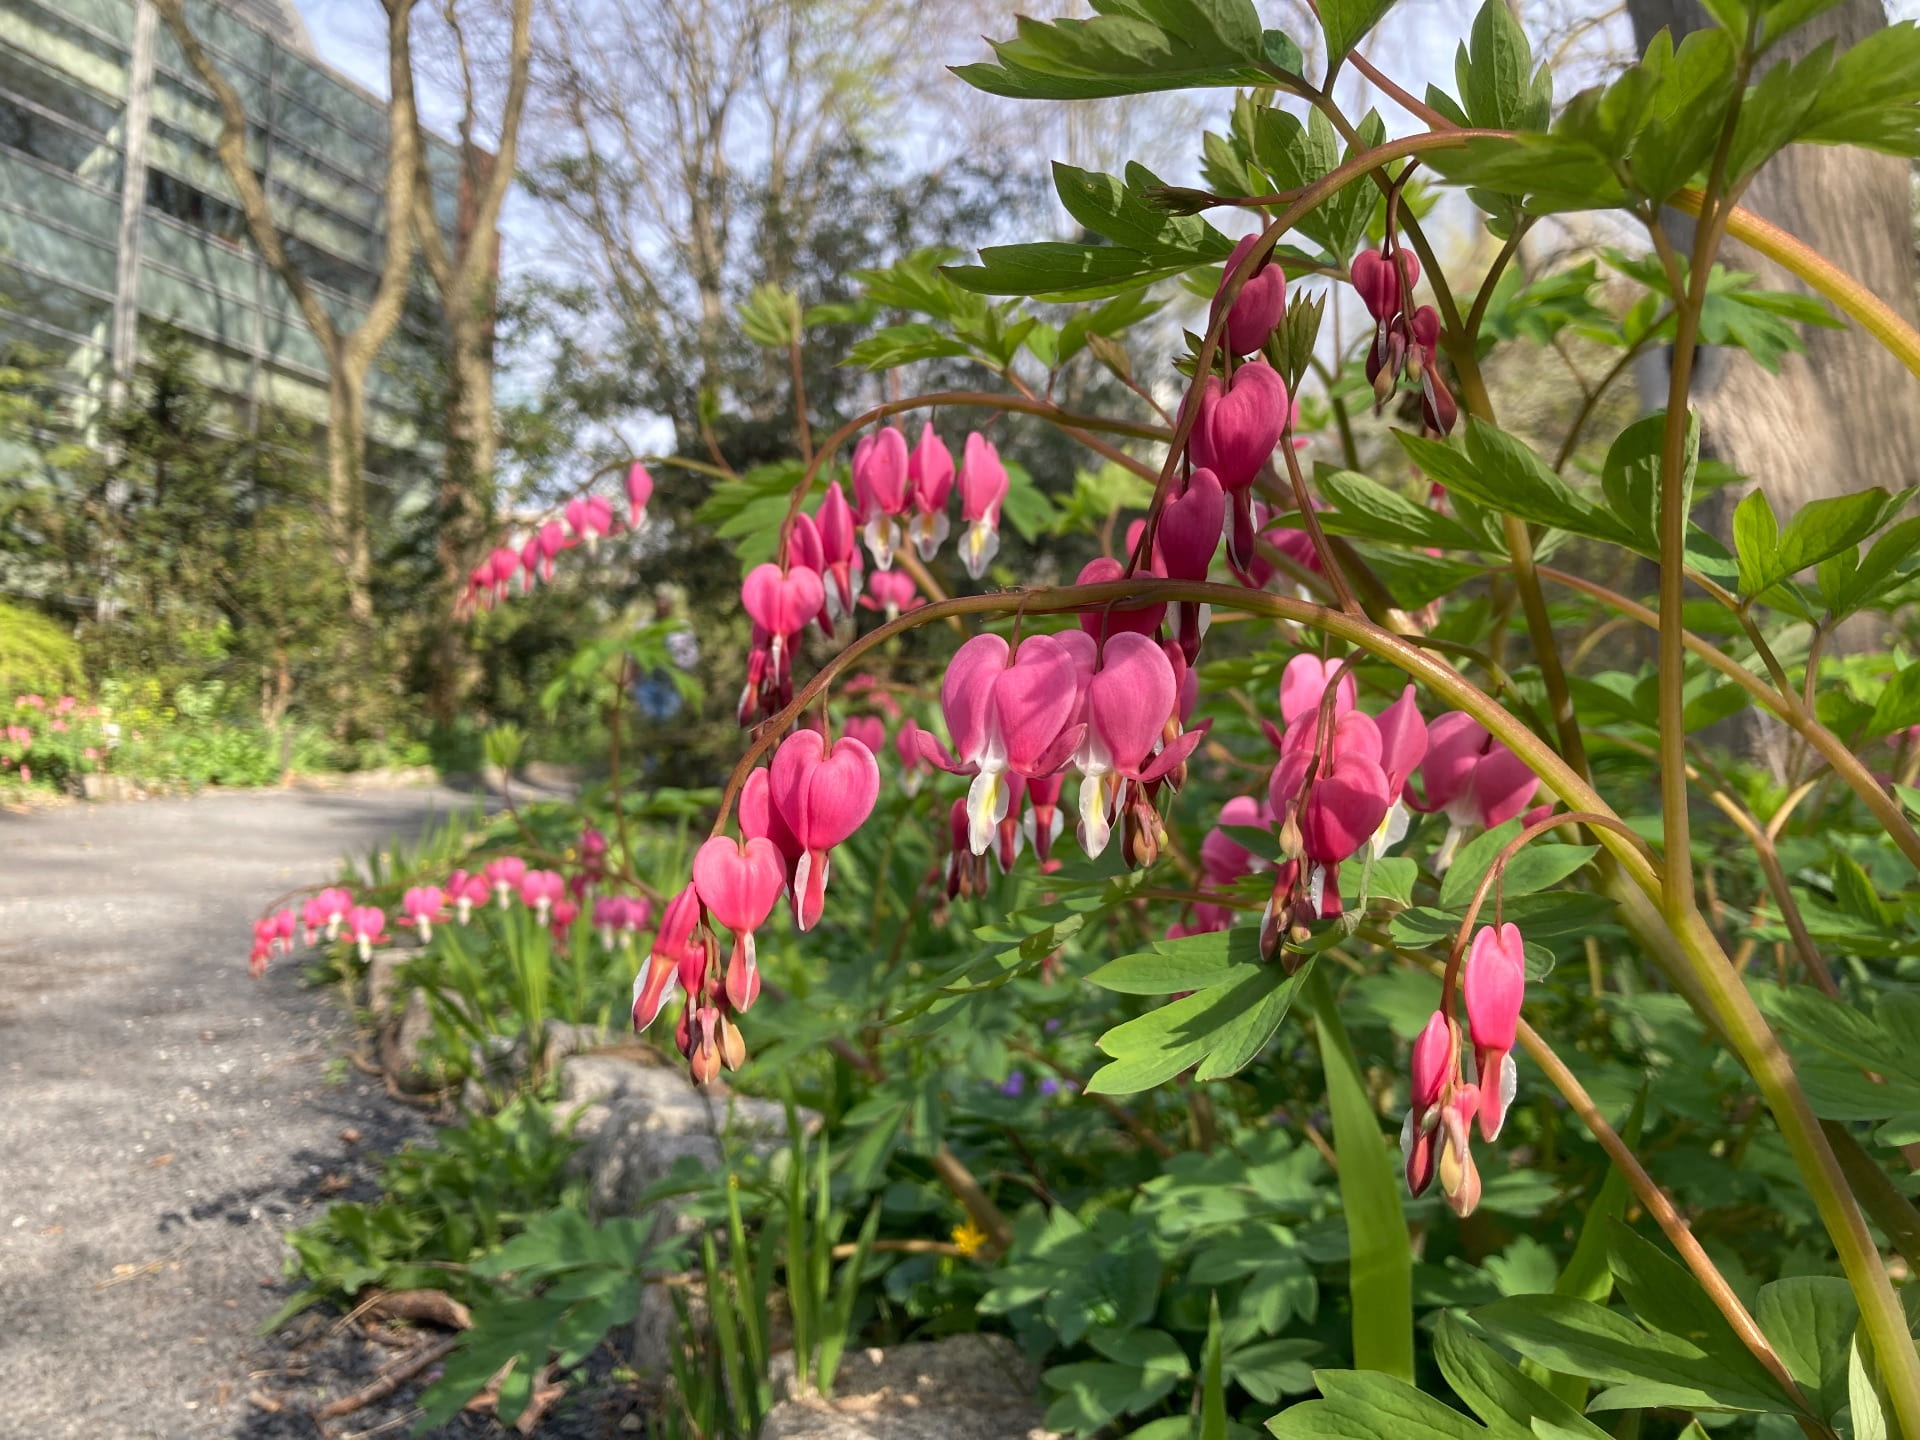 Bleeding hearts, Lamprocapnos spectablis, has uniquely shaped flowers that are blooming now, along the Main Path.